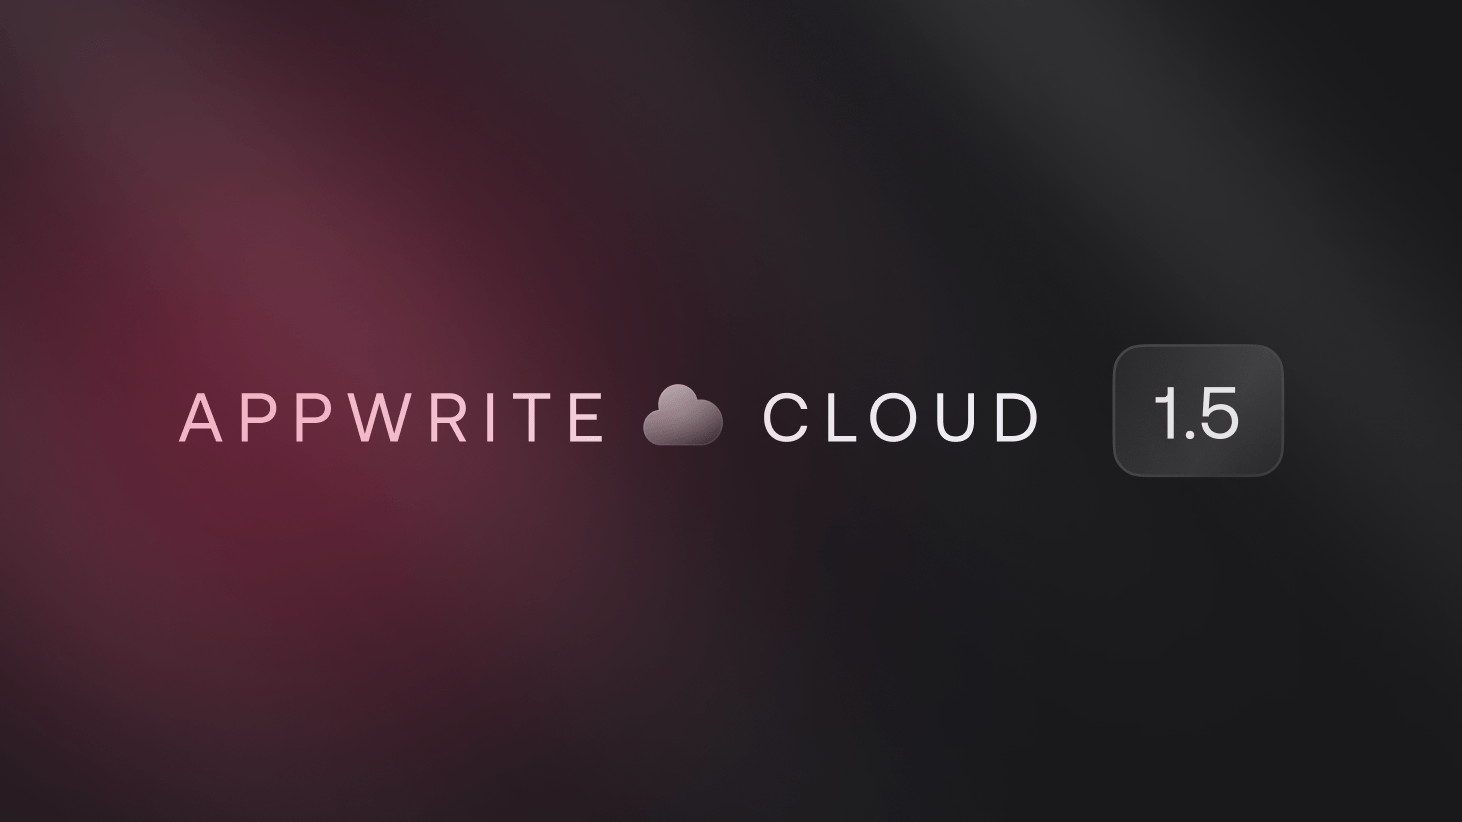 Appwrite 1.5 is now available on Cloud